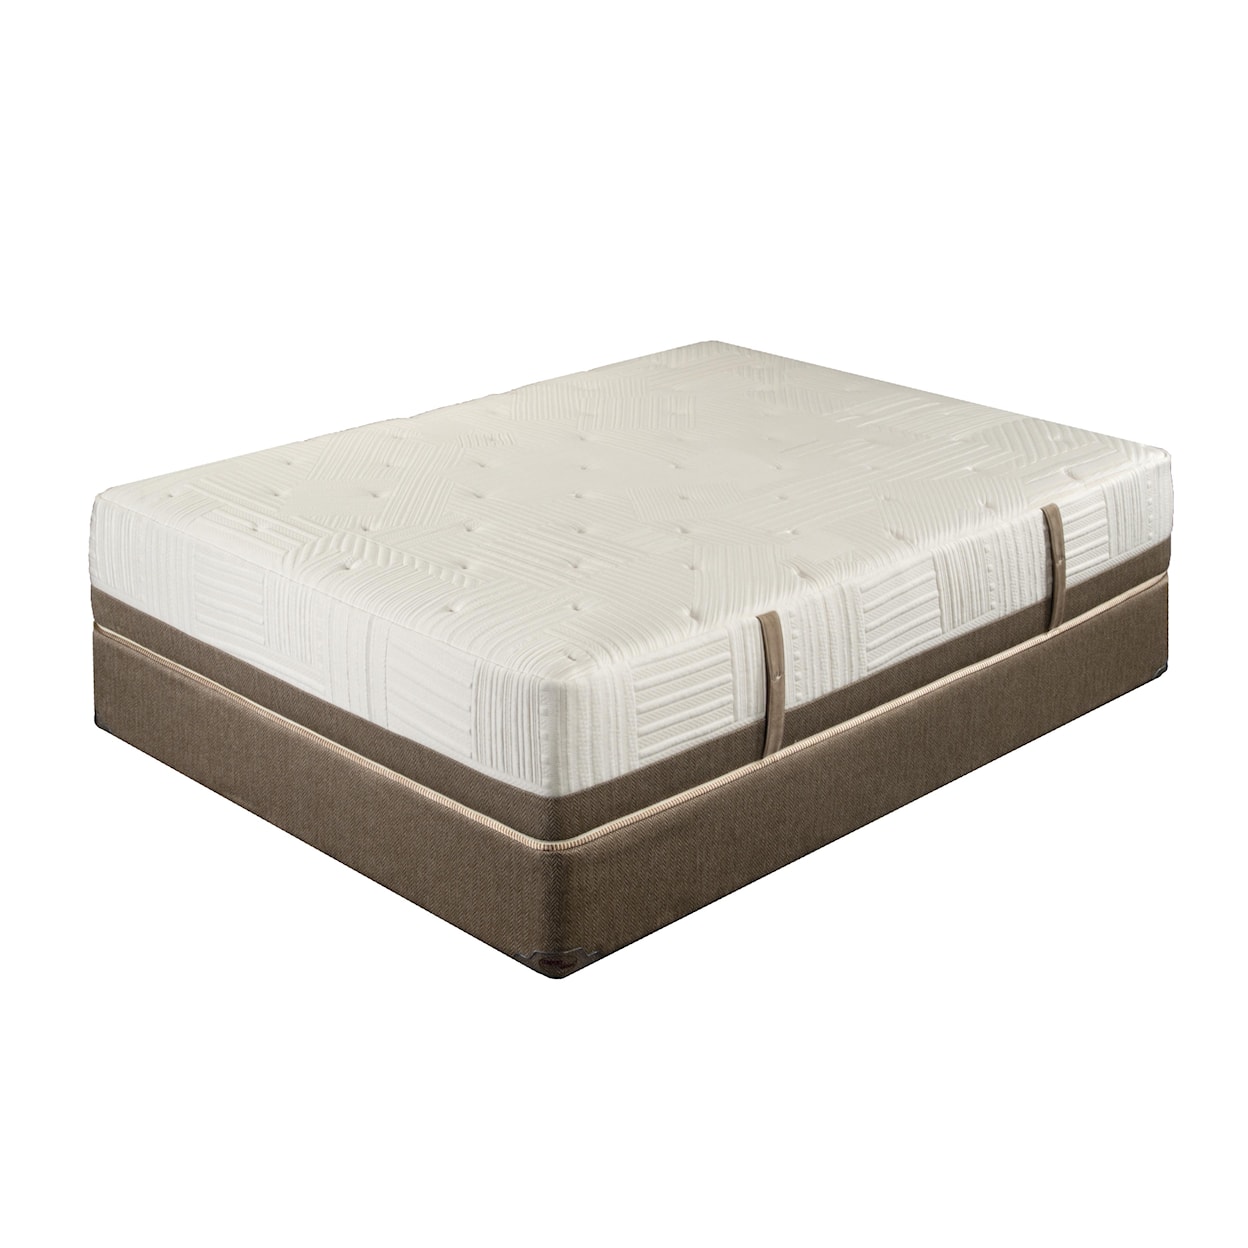 King Koil Extended Life 3100 Twin Luxury Firm Mattress